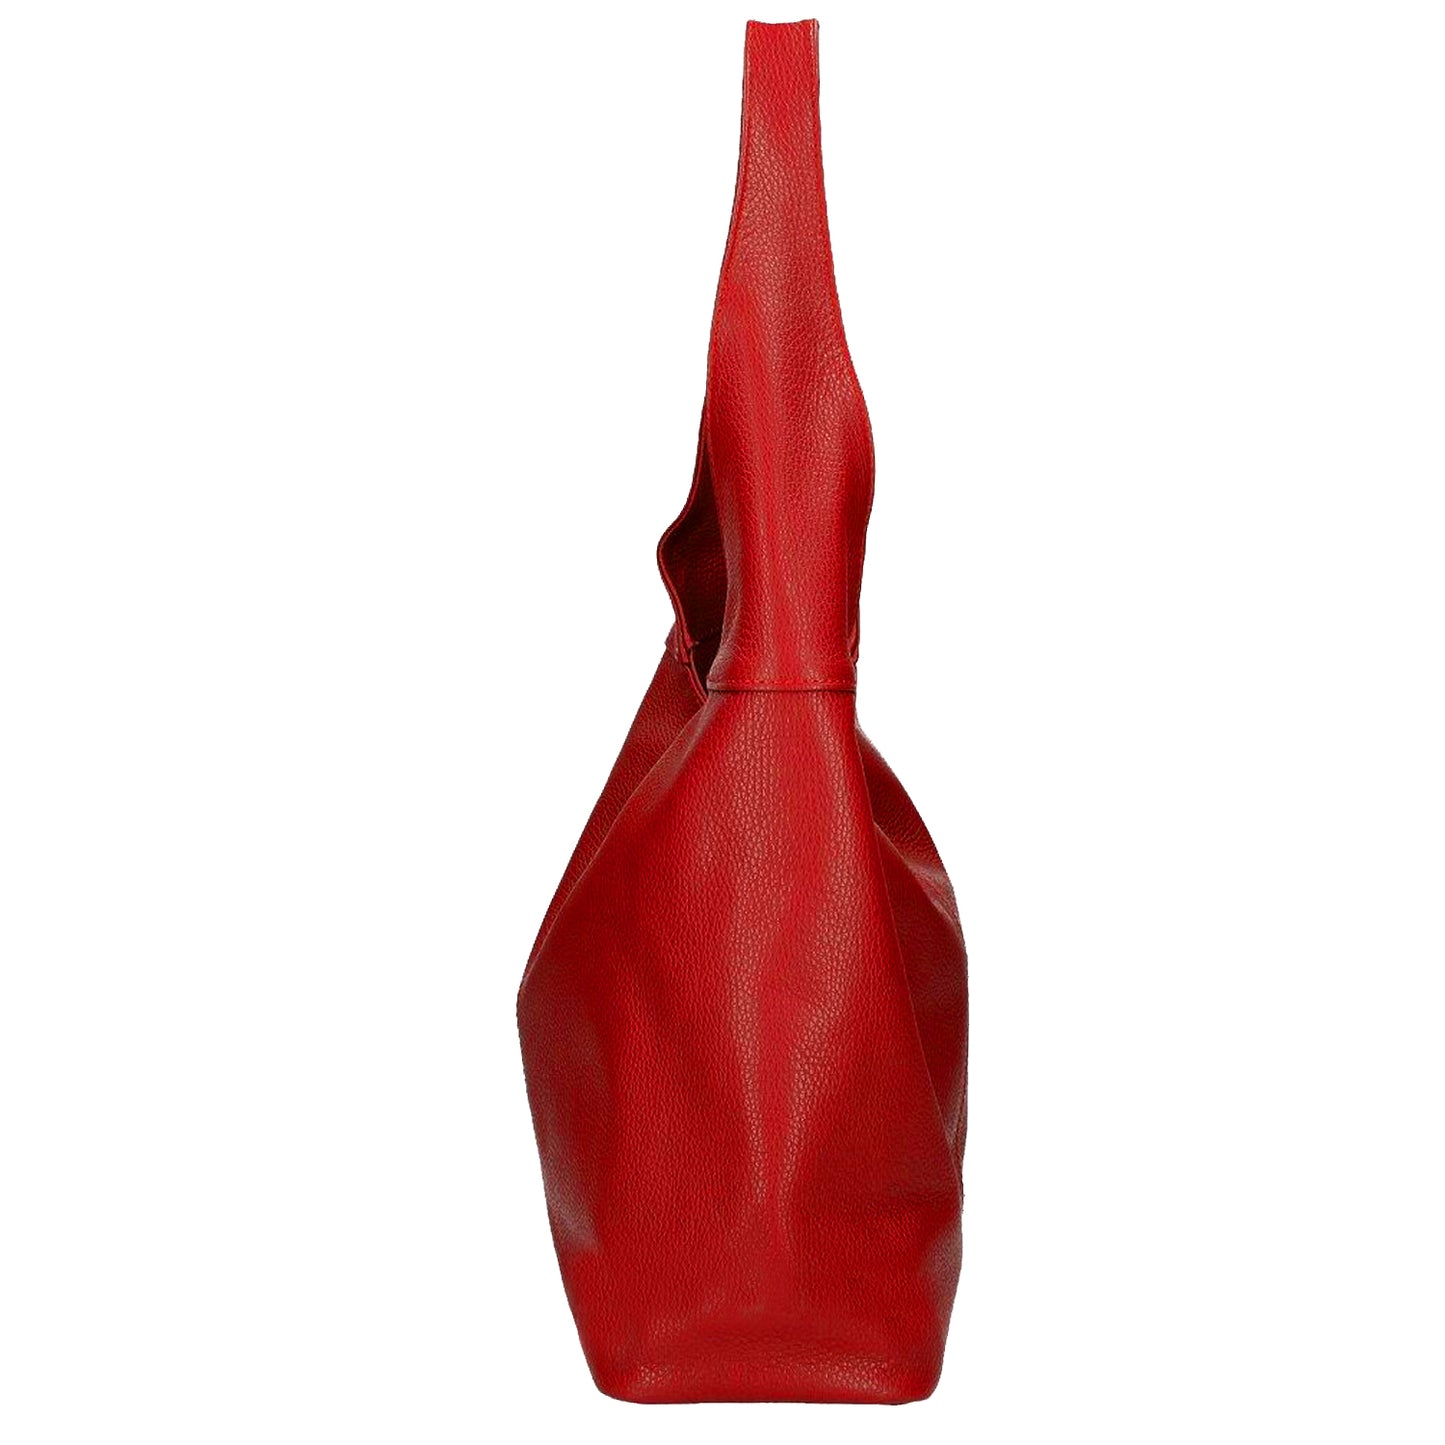 Red Soft Pebbled Leather Hobo Bag